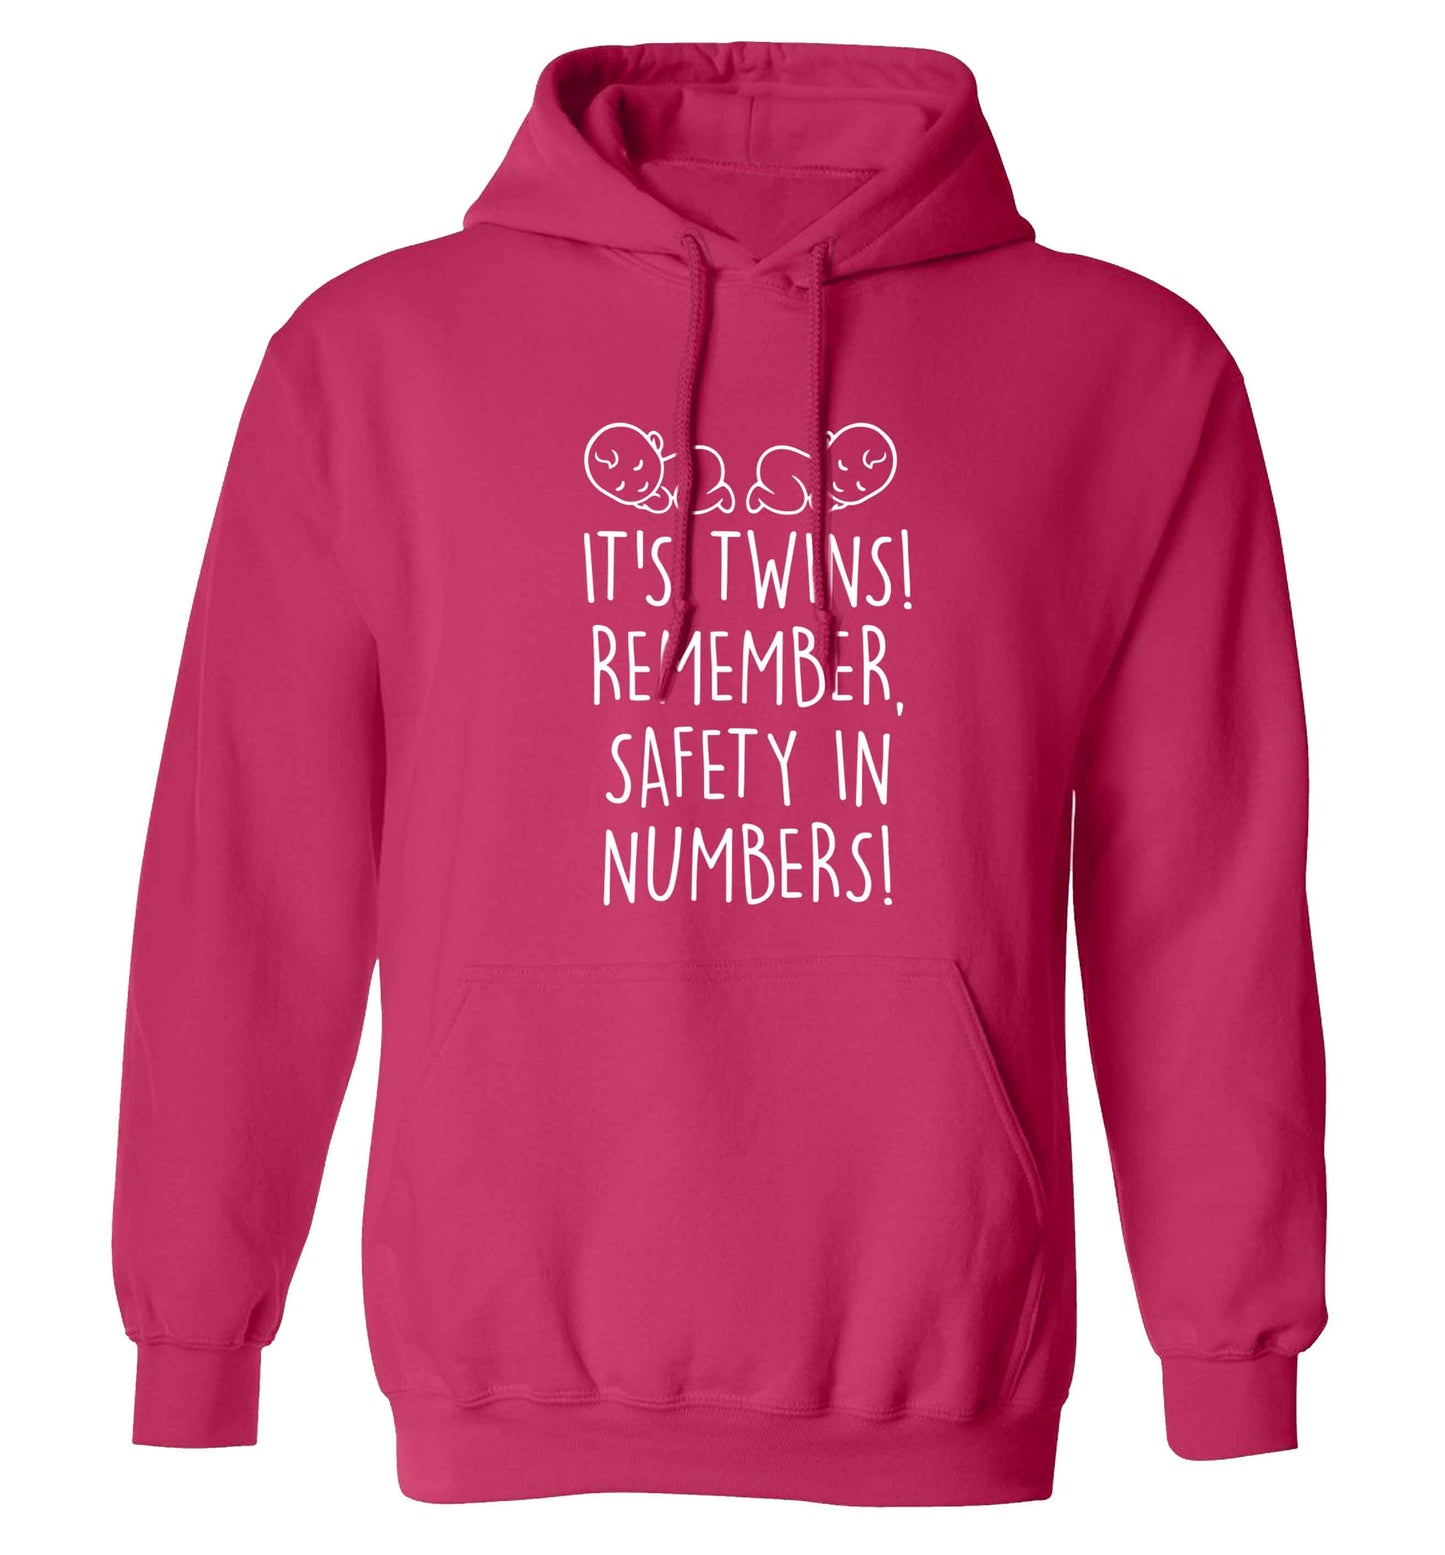 It's twins! Remember safety in numbers! adults unisex pink hoodie 2XL